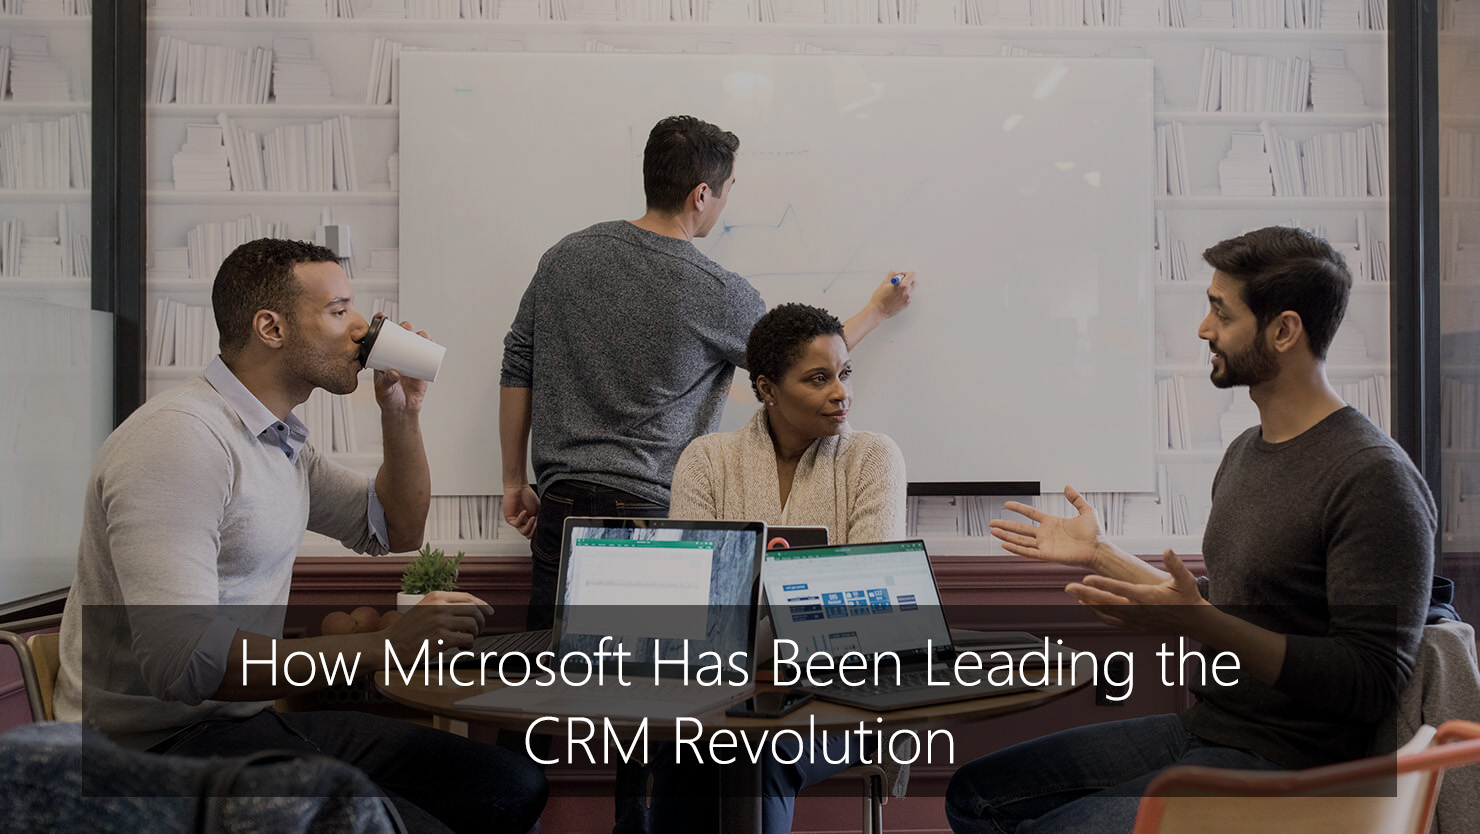 TMC-blog-how-microsoft-has-been-leading-the-crm-revolution